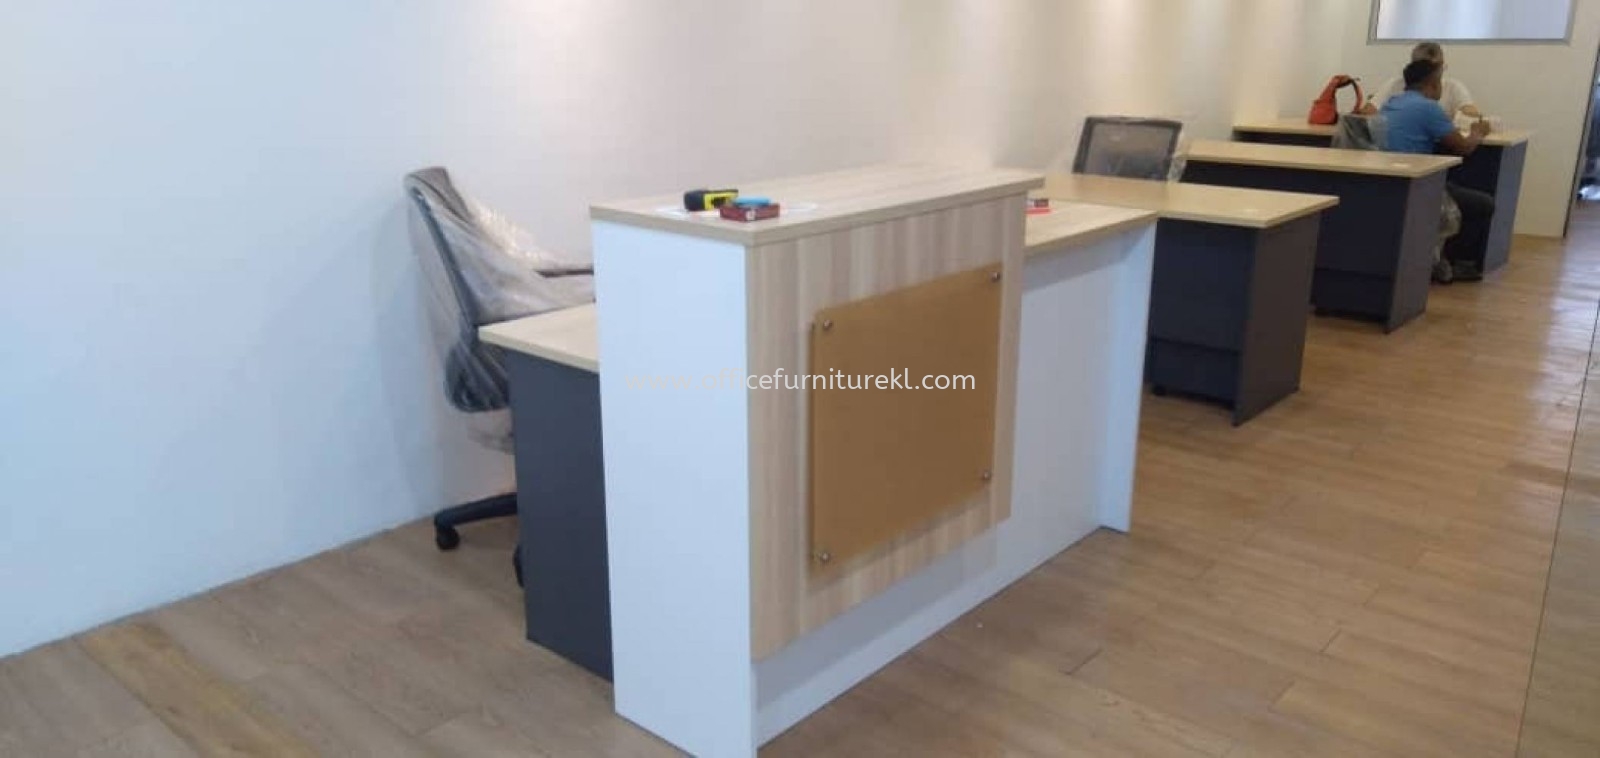 FREE DELIVERY & INSTALLATION MUPHI RECEPTION OFFICE COUNTER AB-SCT 1800 l WRITING OFFICE TABLE GT 157 l MOBILE OFFICE PEDESTAL 3D GM 3 l OFFICE FURNITURE l SUNGAI BULOH l SELANGOR l TOP 10 BEST SELLING